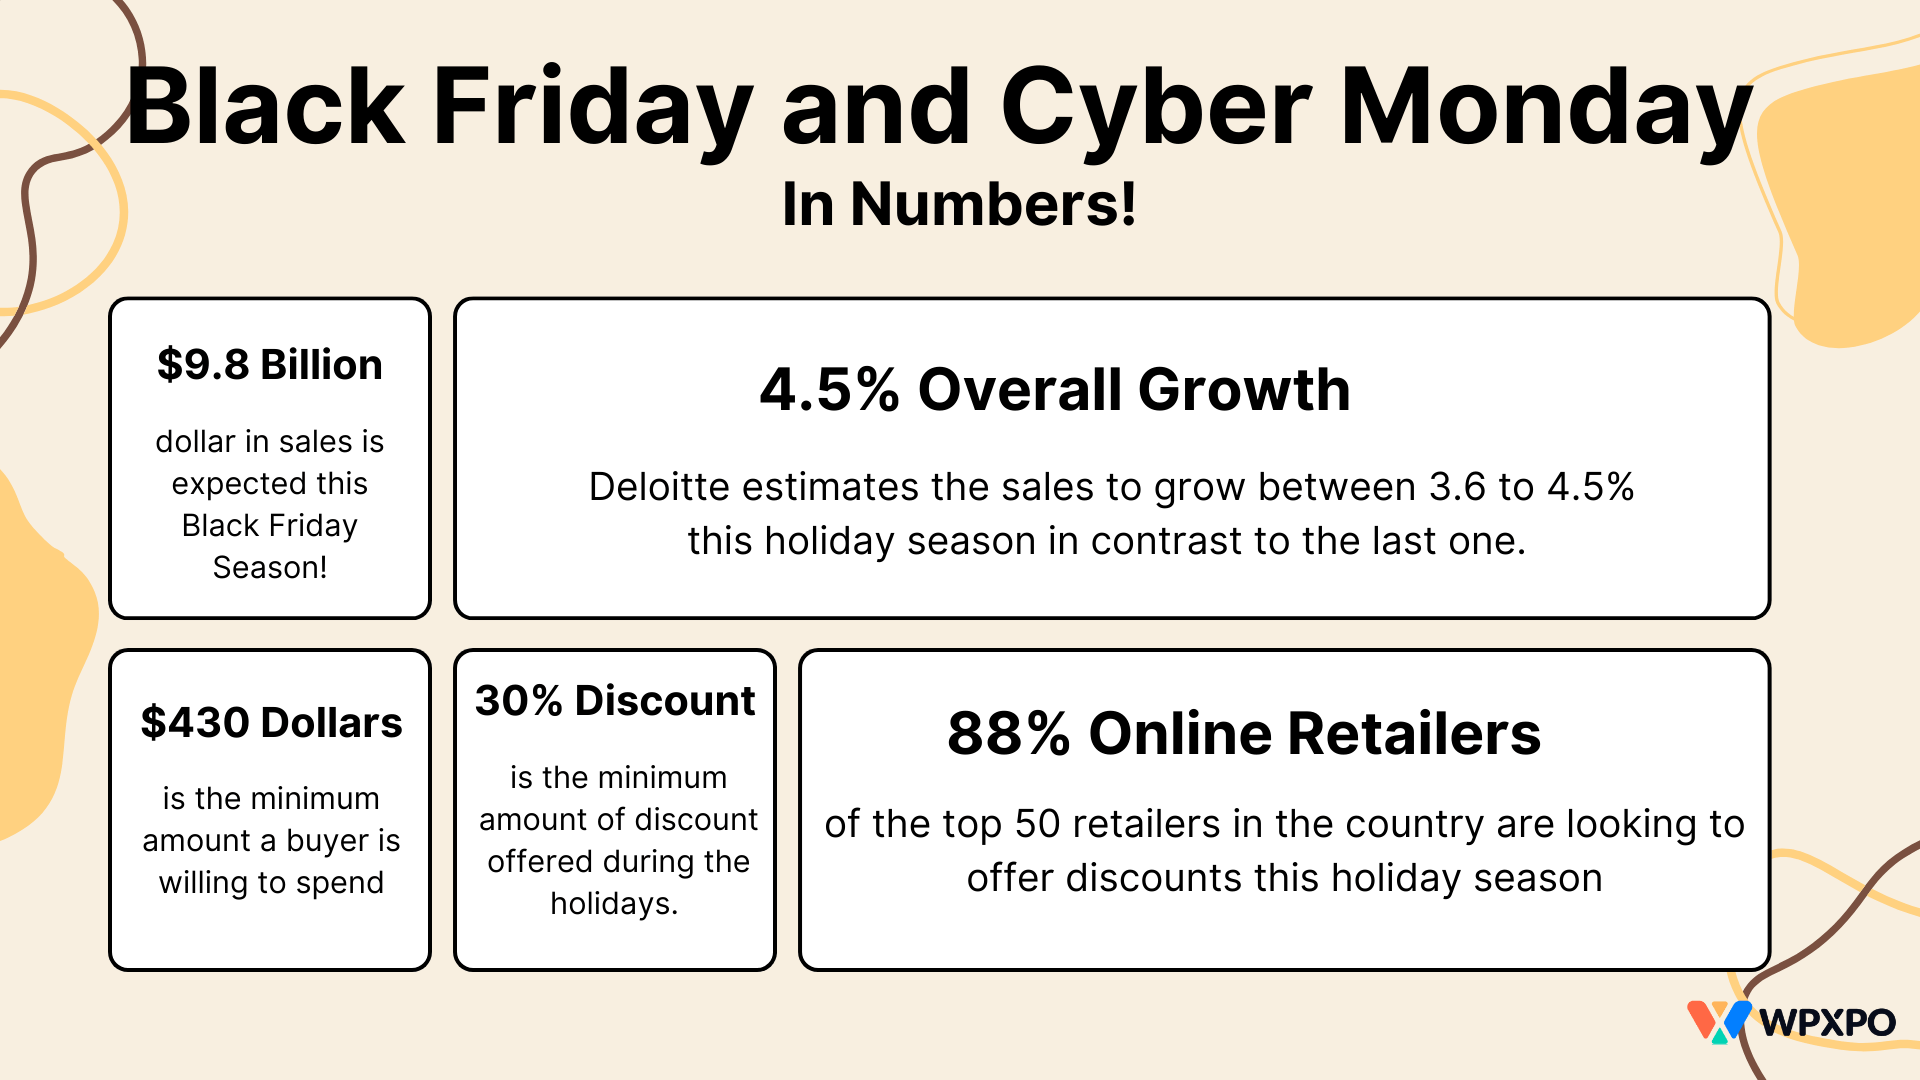 Cyber Monday and Black Friday Marketing in Numbers